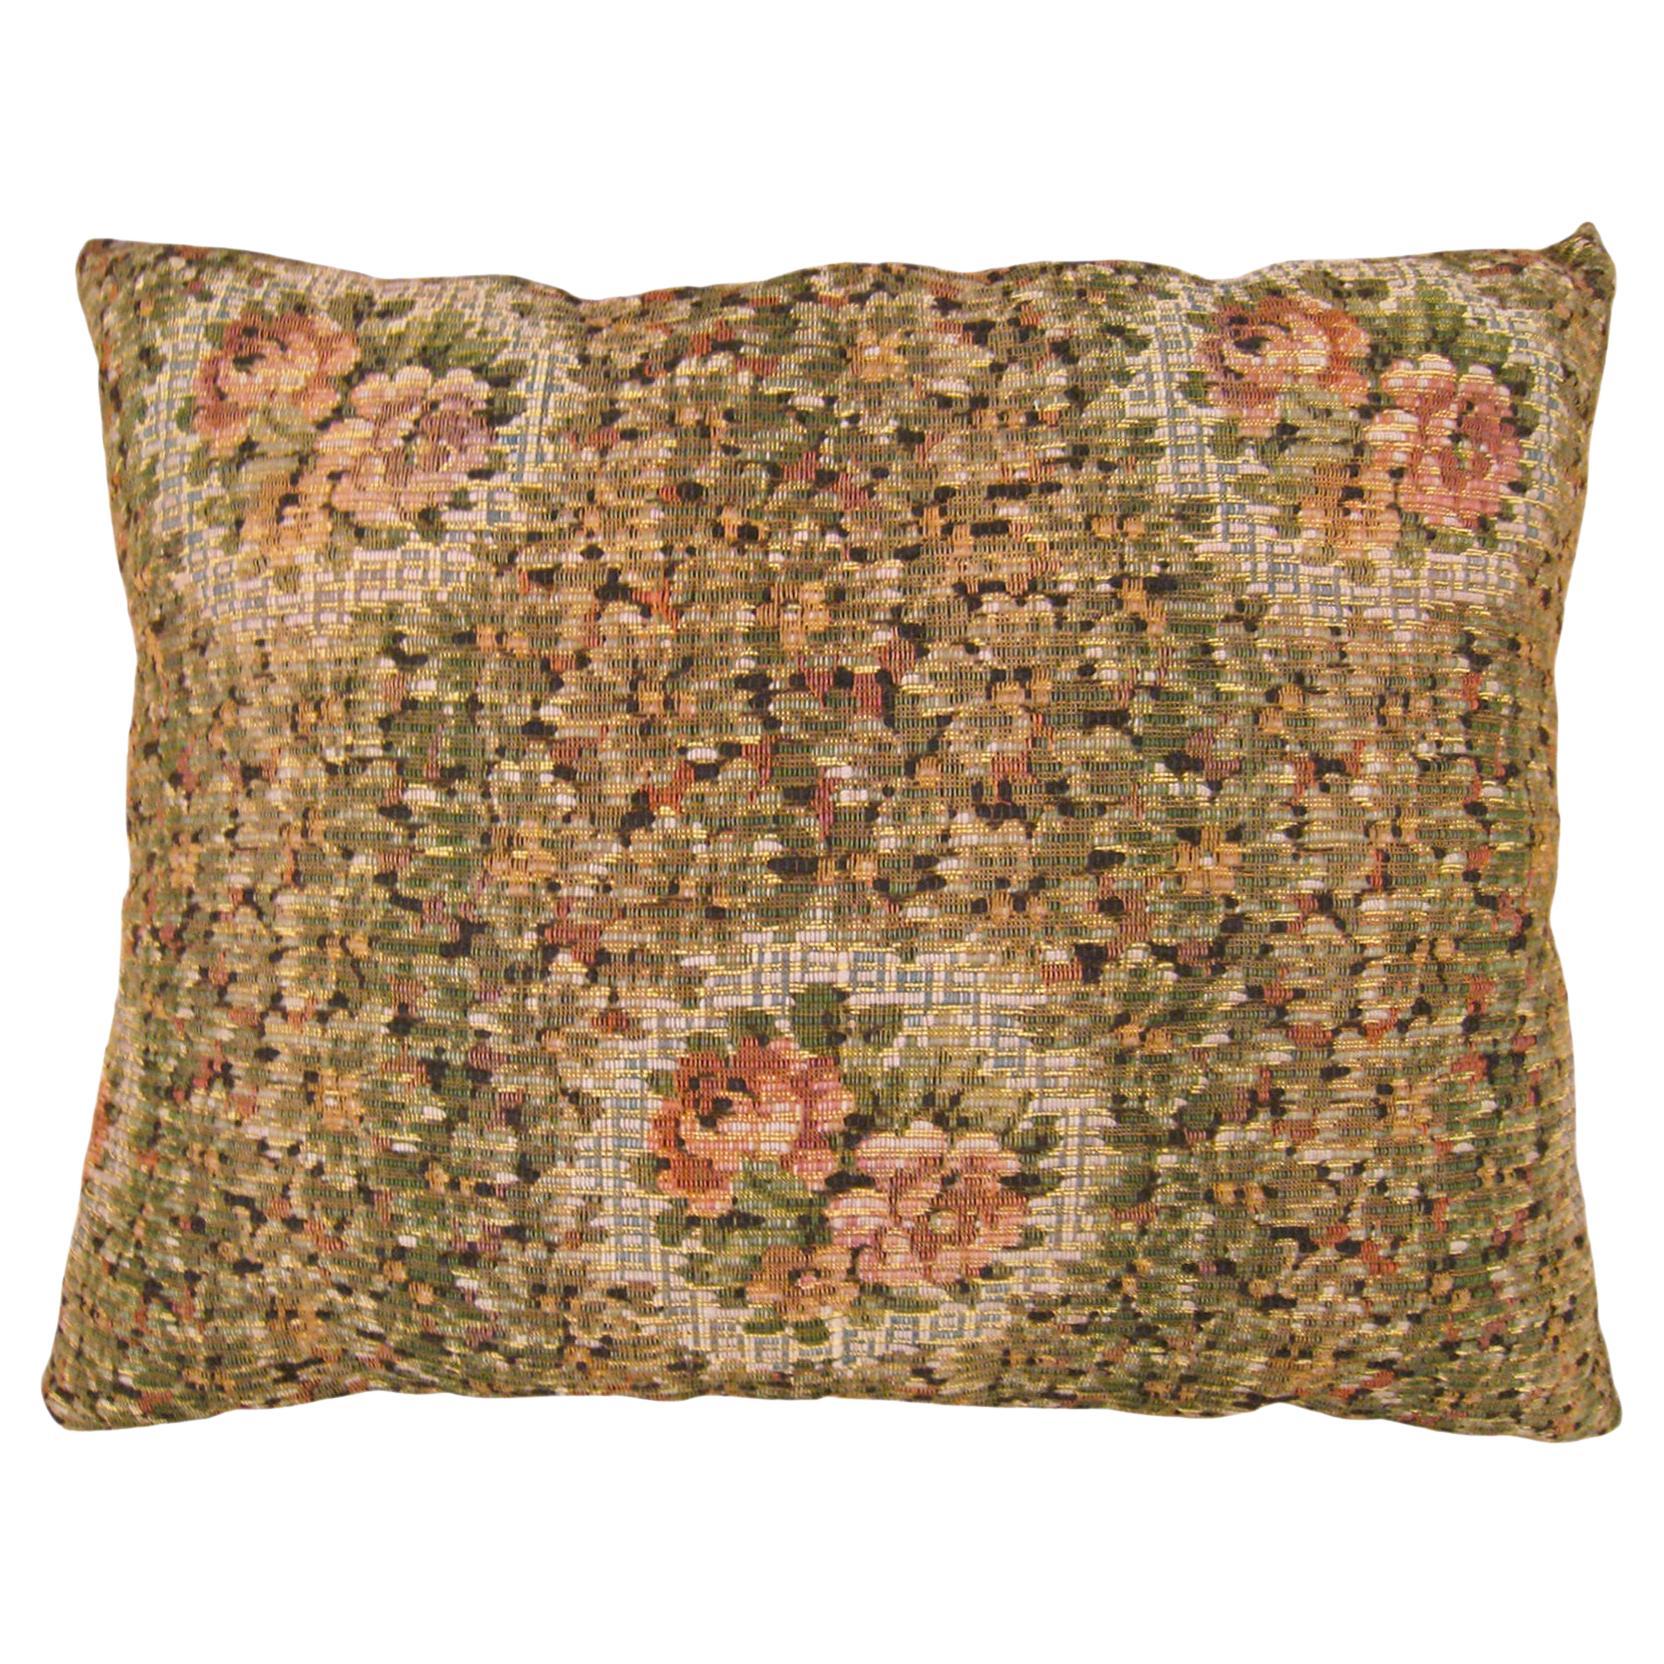 Decorative Antique Jacquard Tapestry Pillow with Floral Elments Allover For Sale